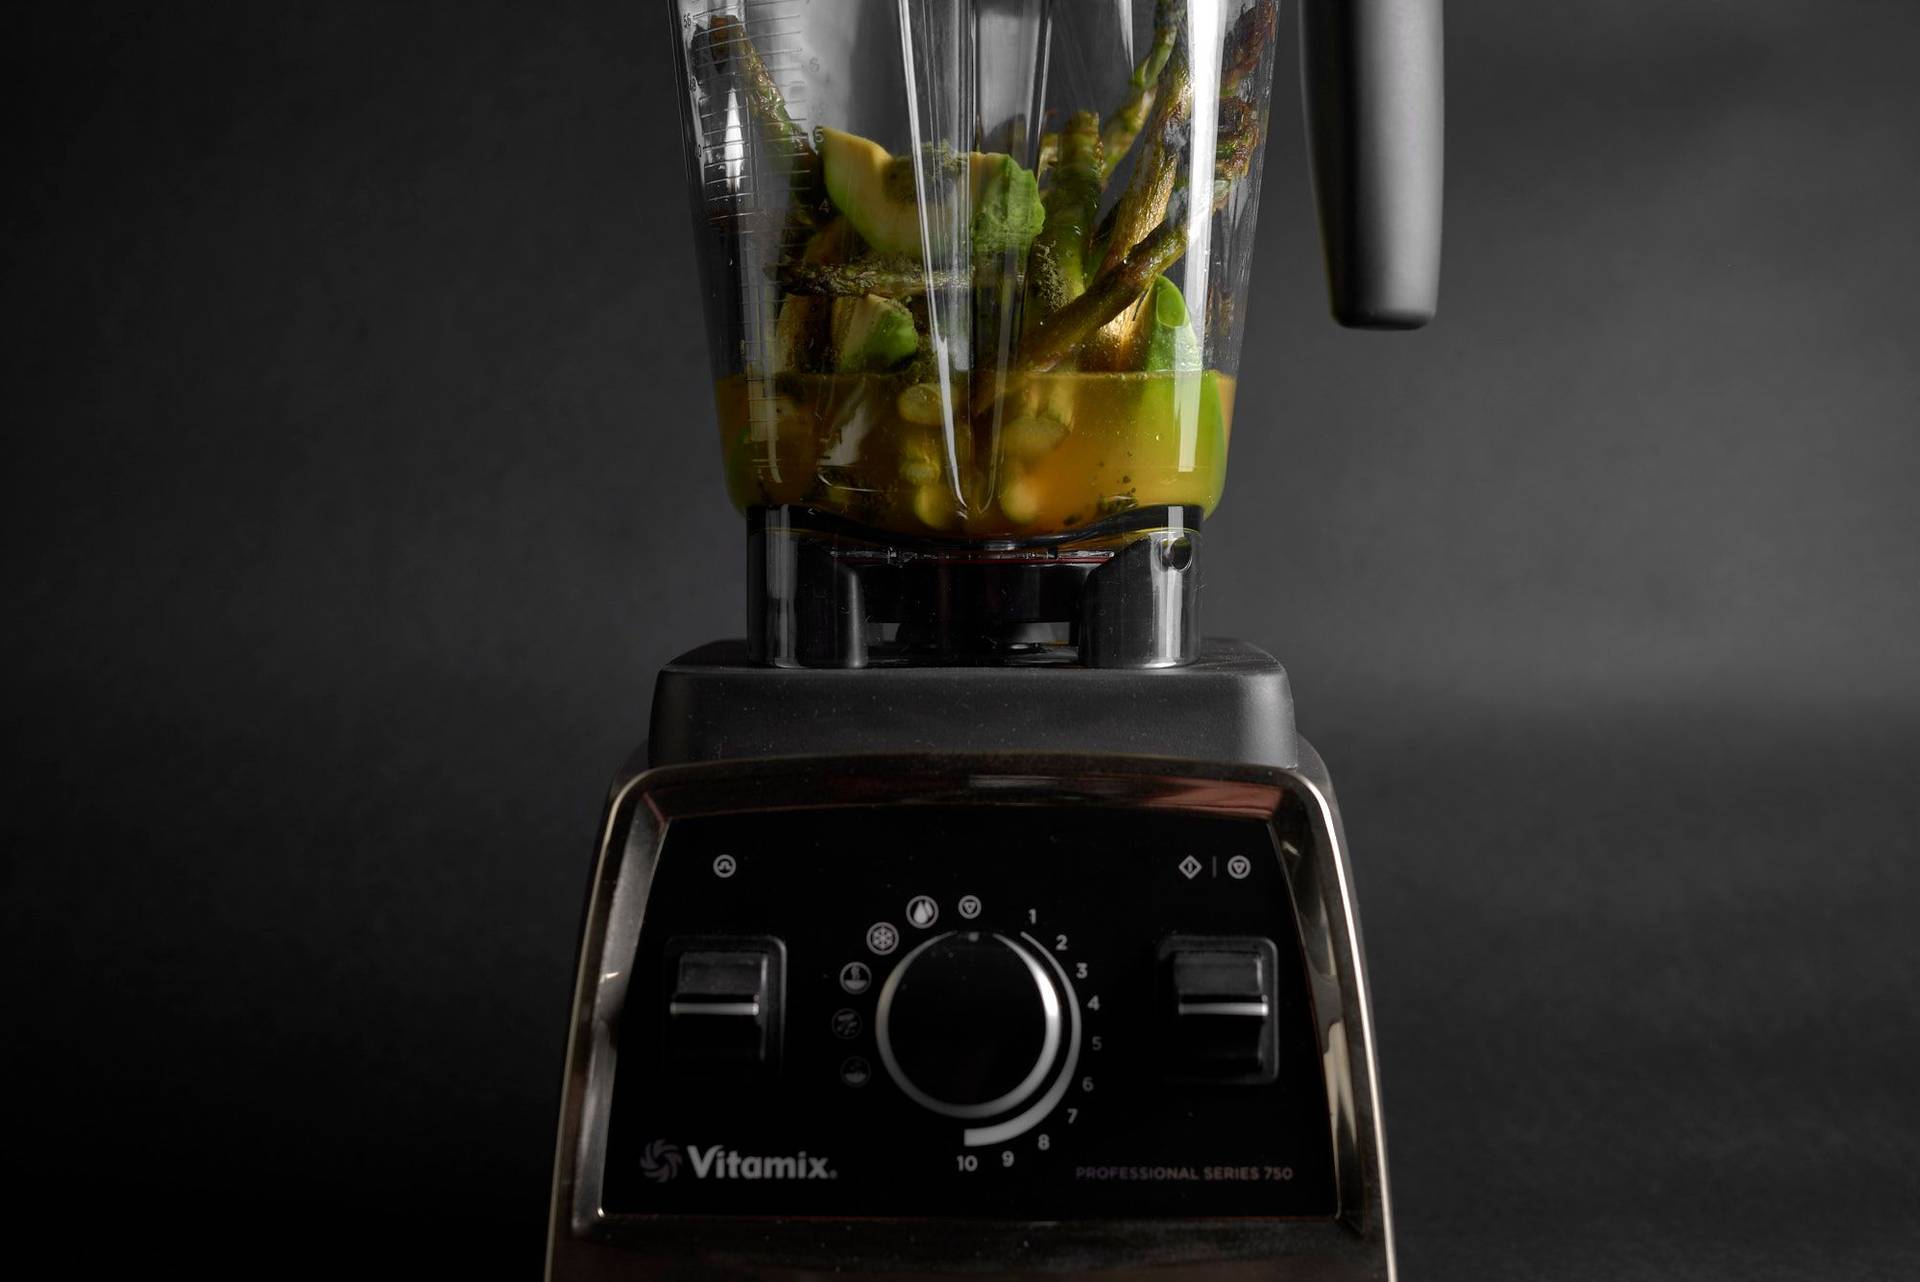 making asparagus-matcha sauce in a kitchen blender with black background